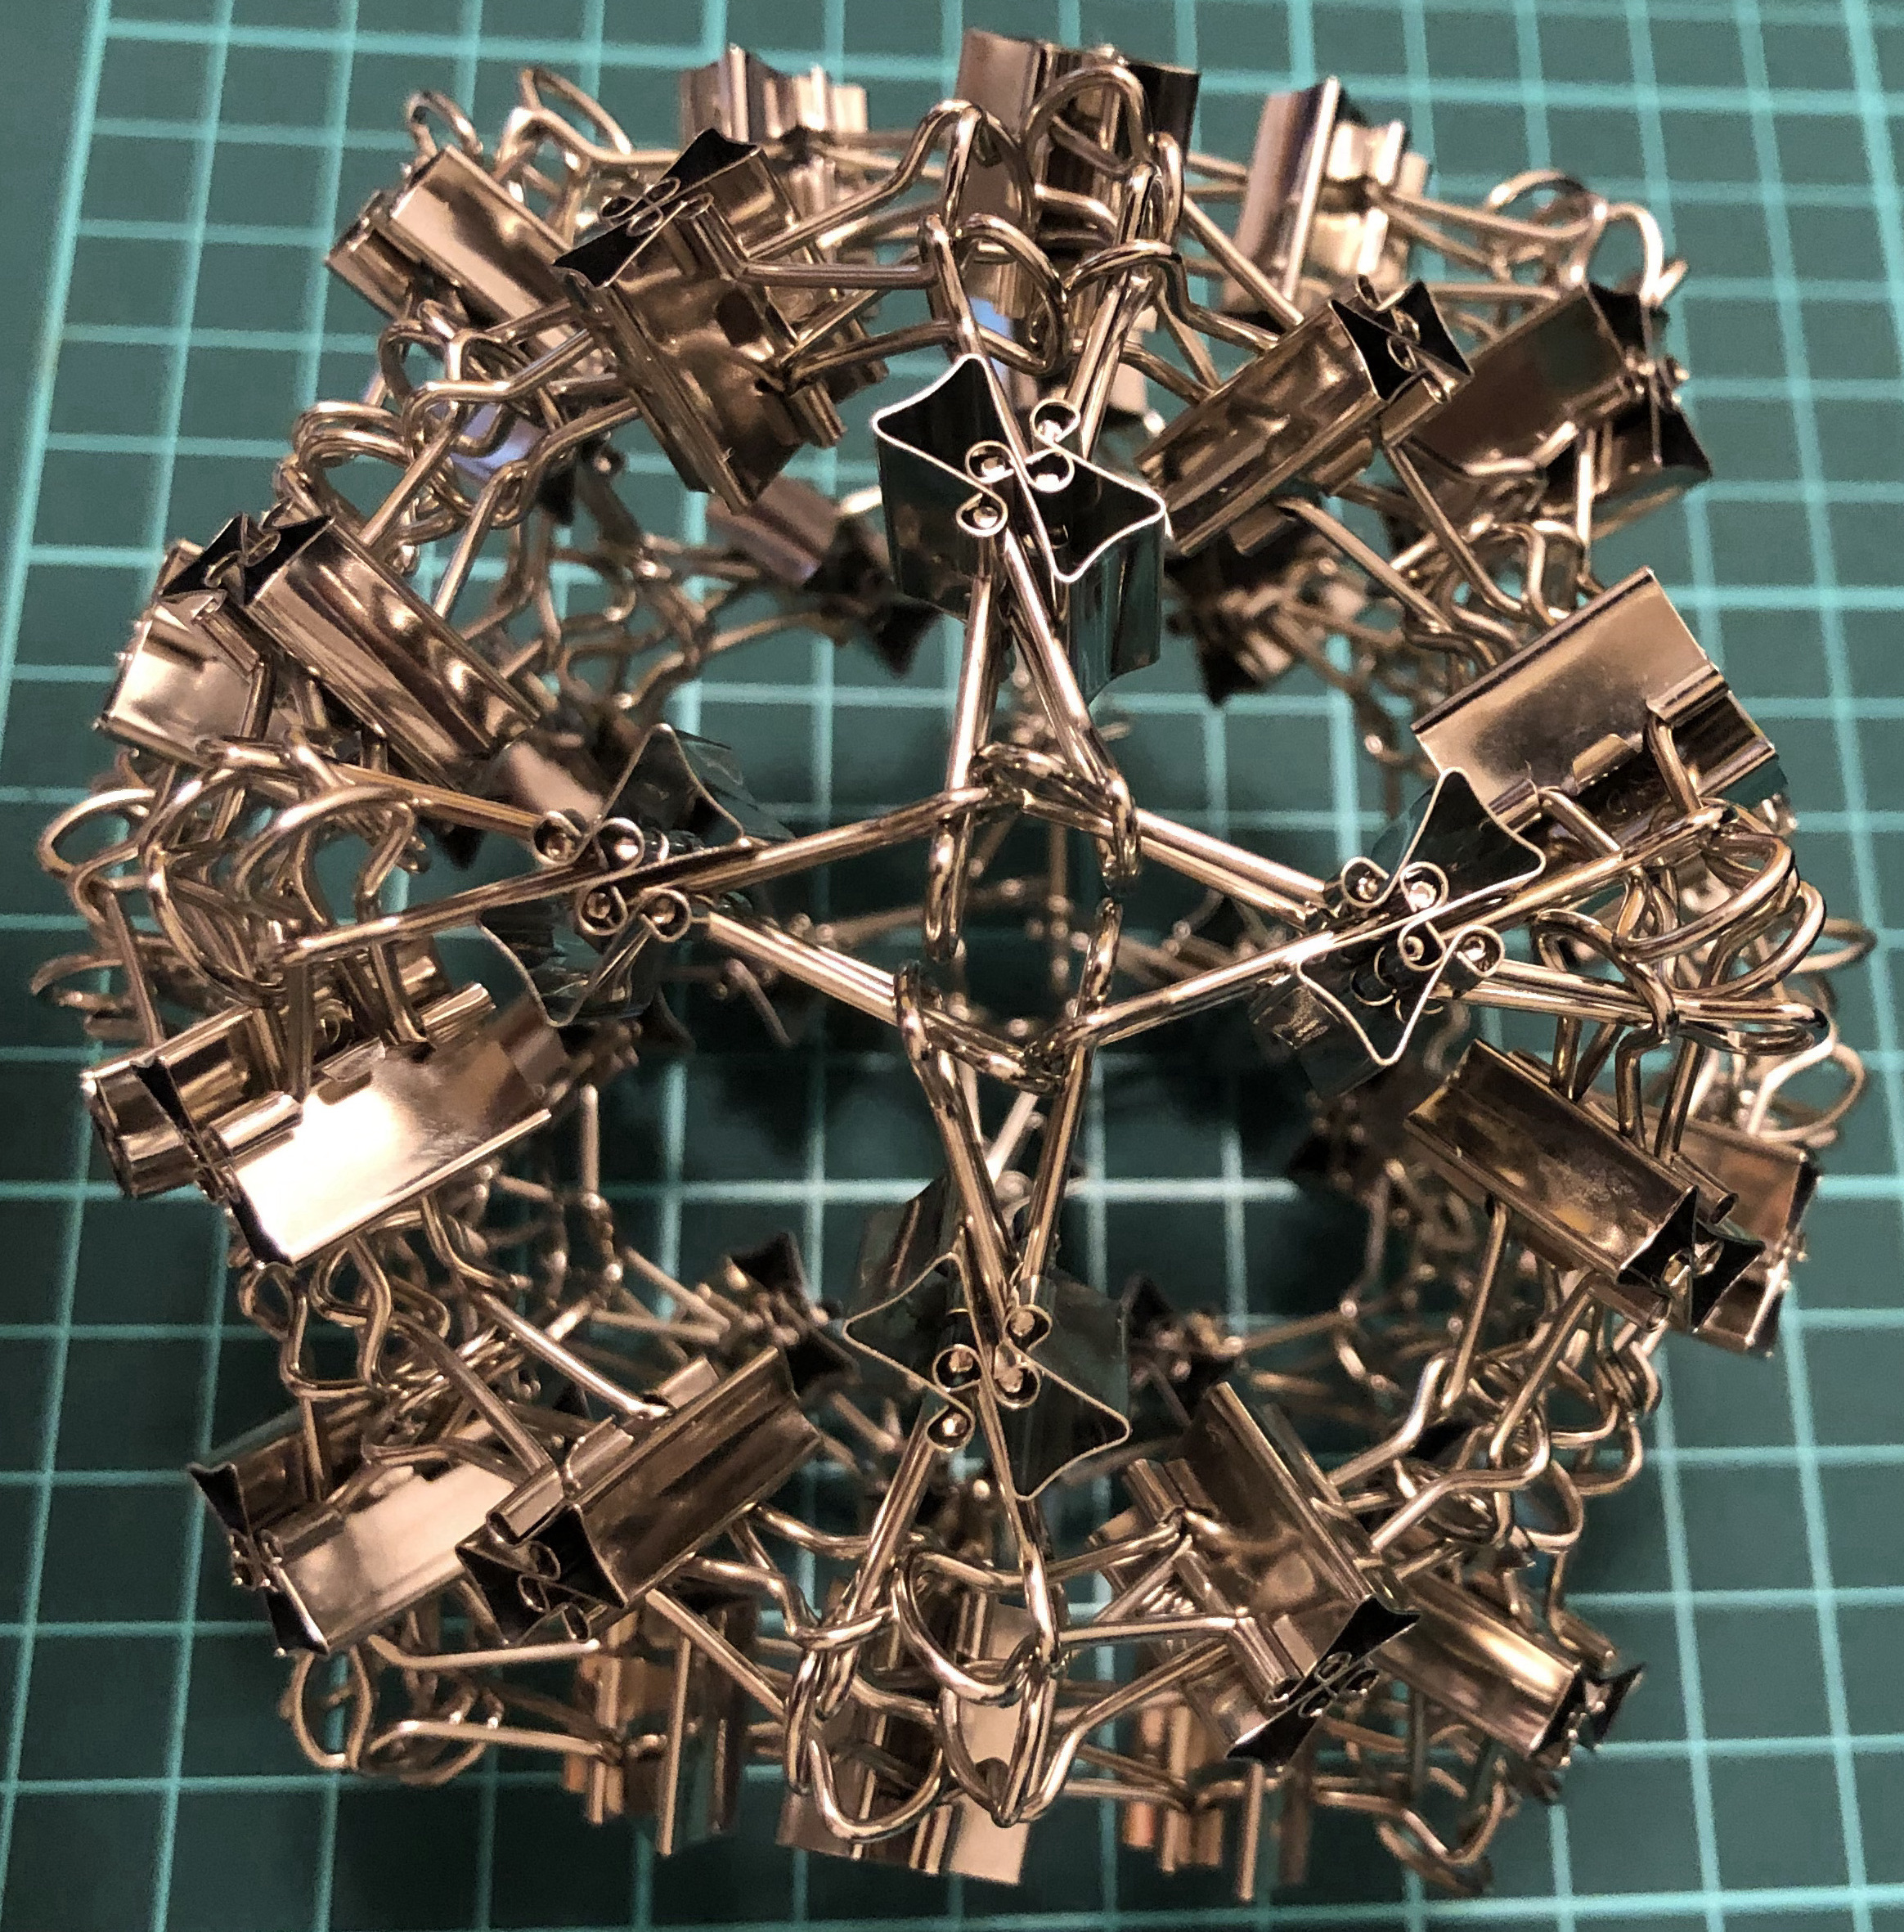 96 clips forming 96 I-edges forming deltoidal icositetrahedron